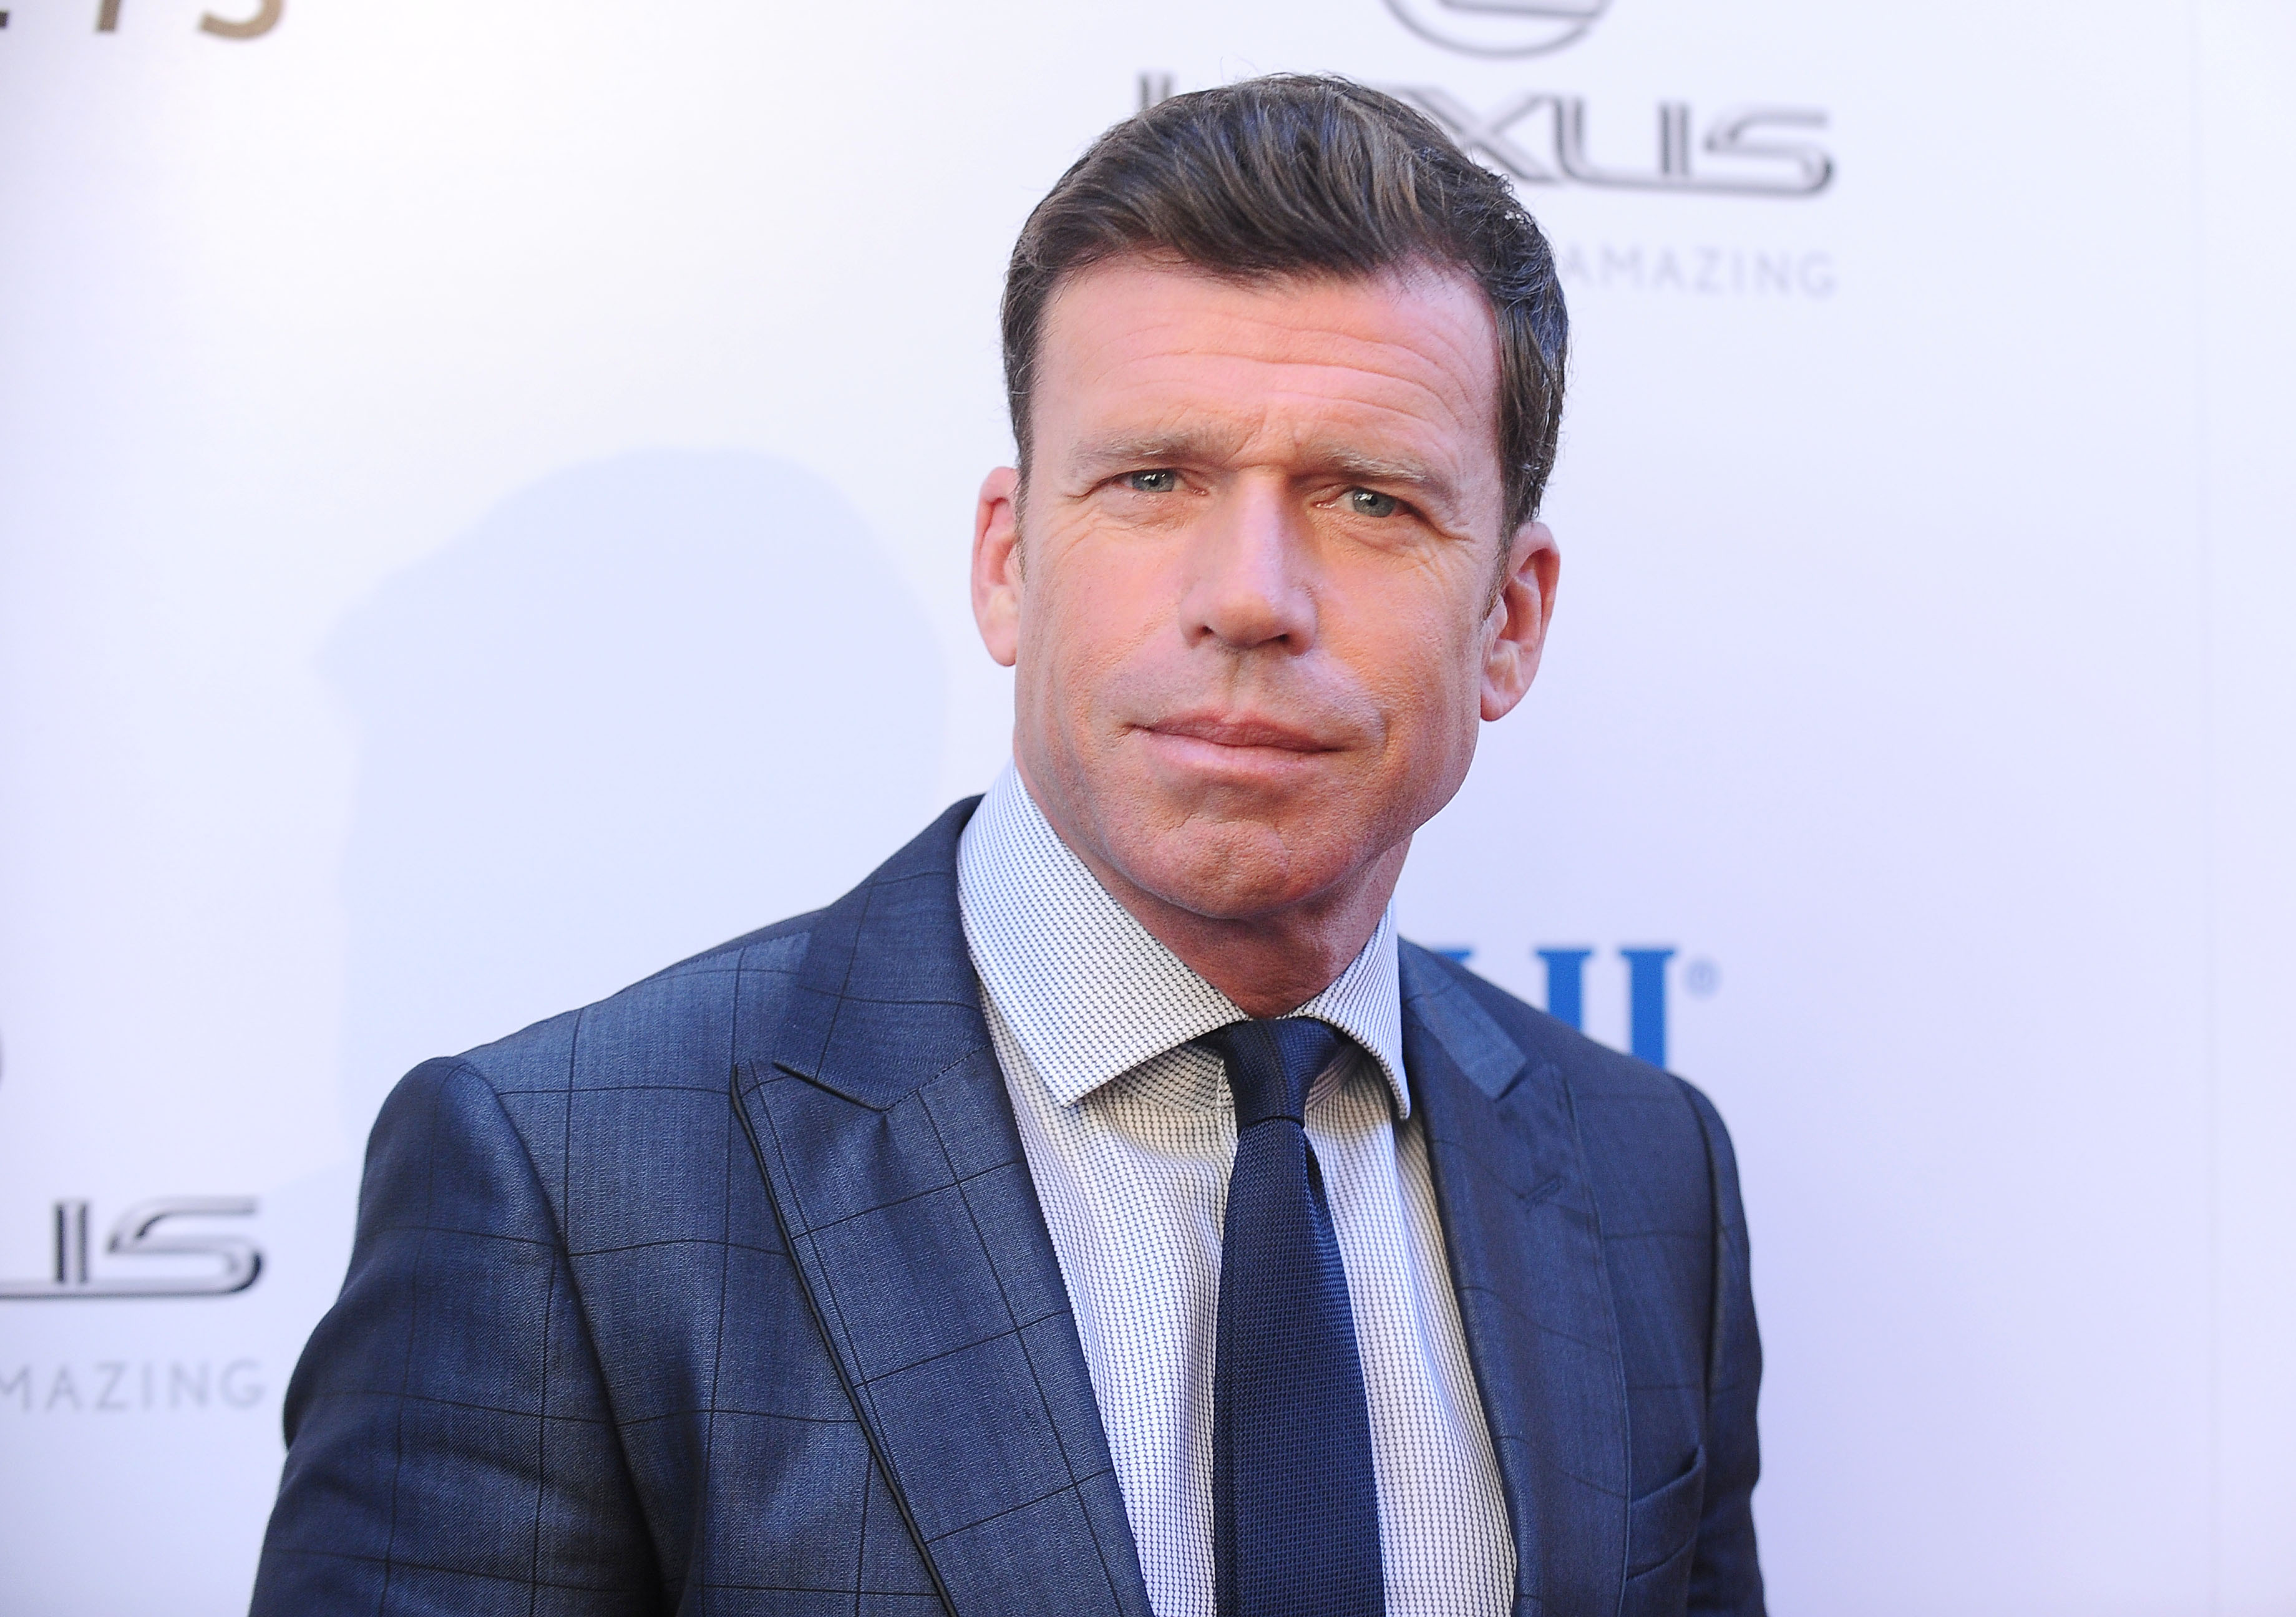 Taylor Sheridan attends the premiere of 'Wind River' at The Theatre at Ace Hotel on July 26, 2017 in Los Angeles, California.